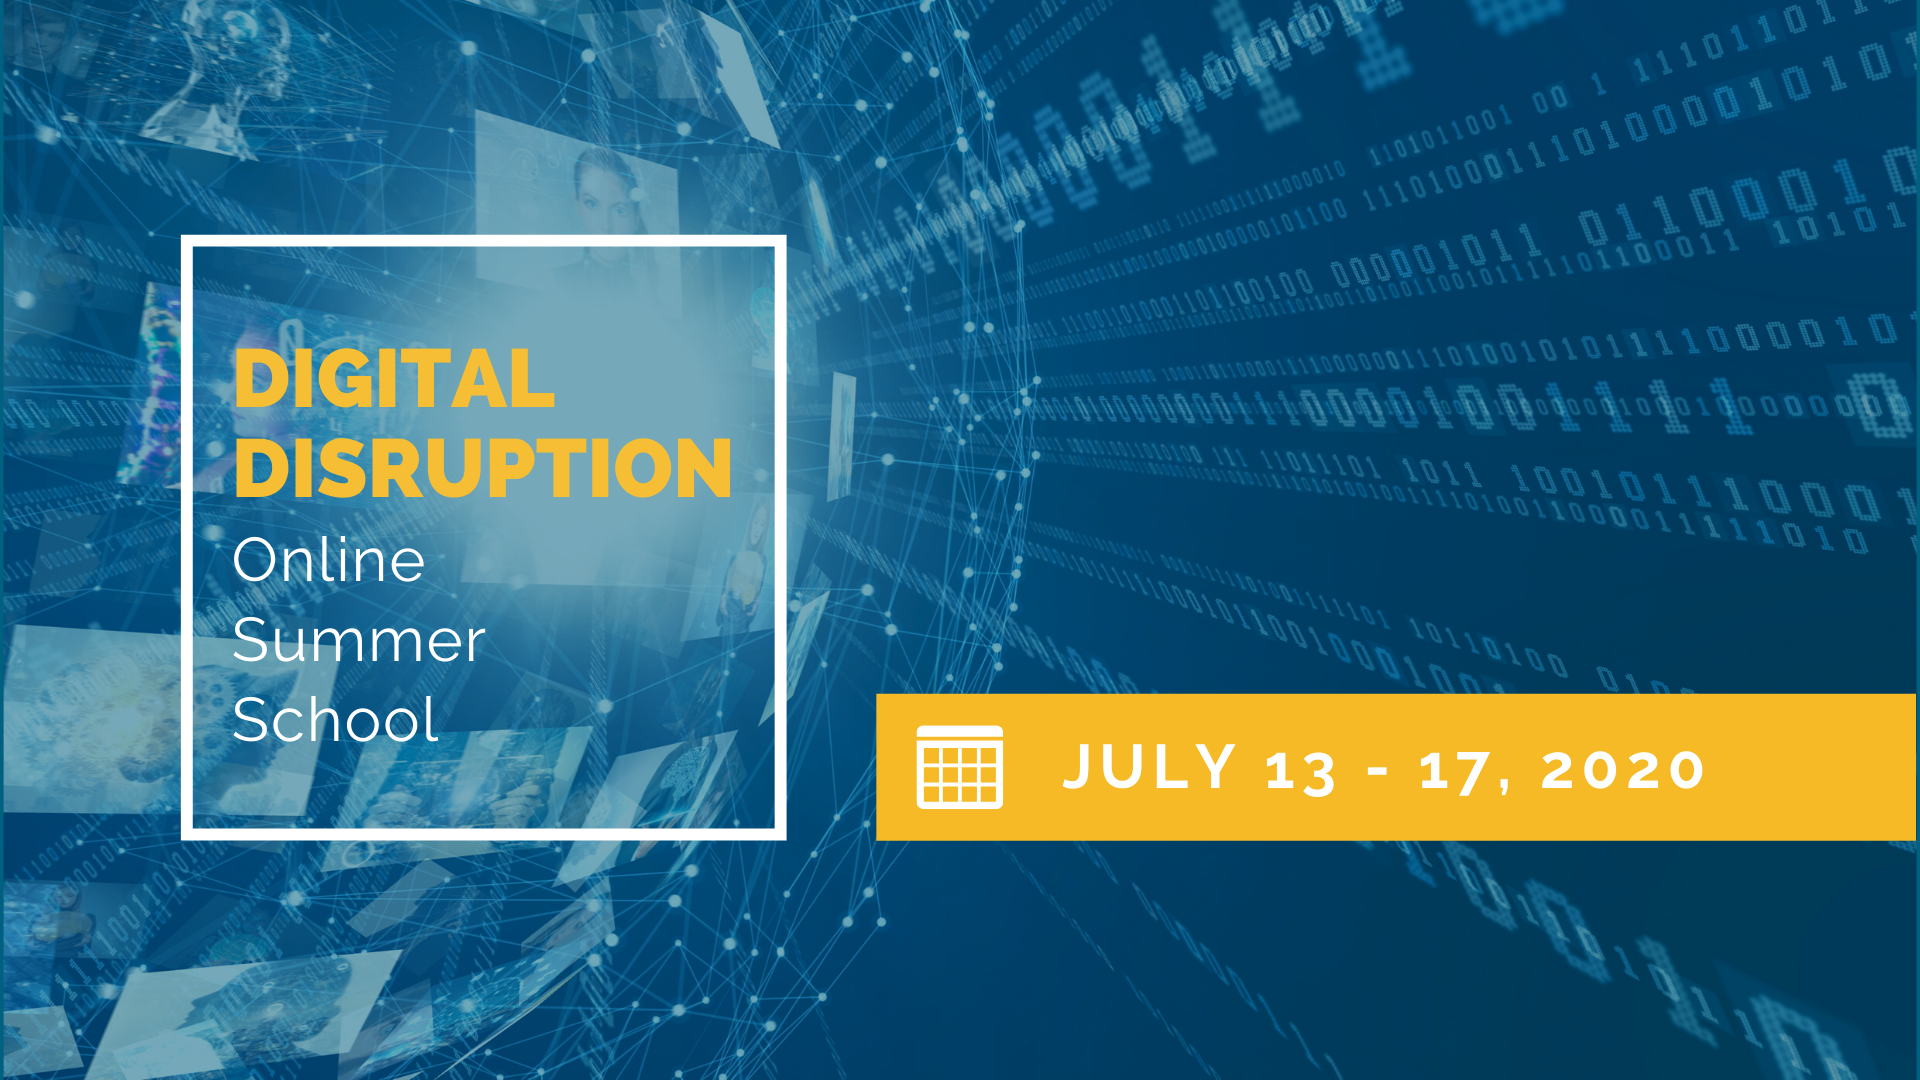 Online Summer School at Faculty of Business Administration: Digital Disruption